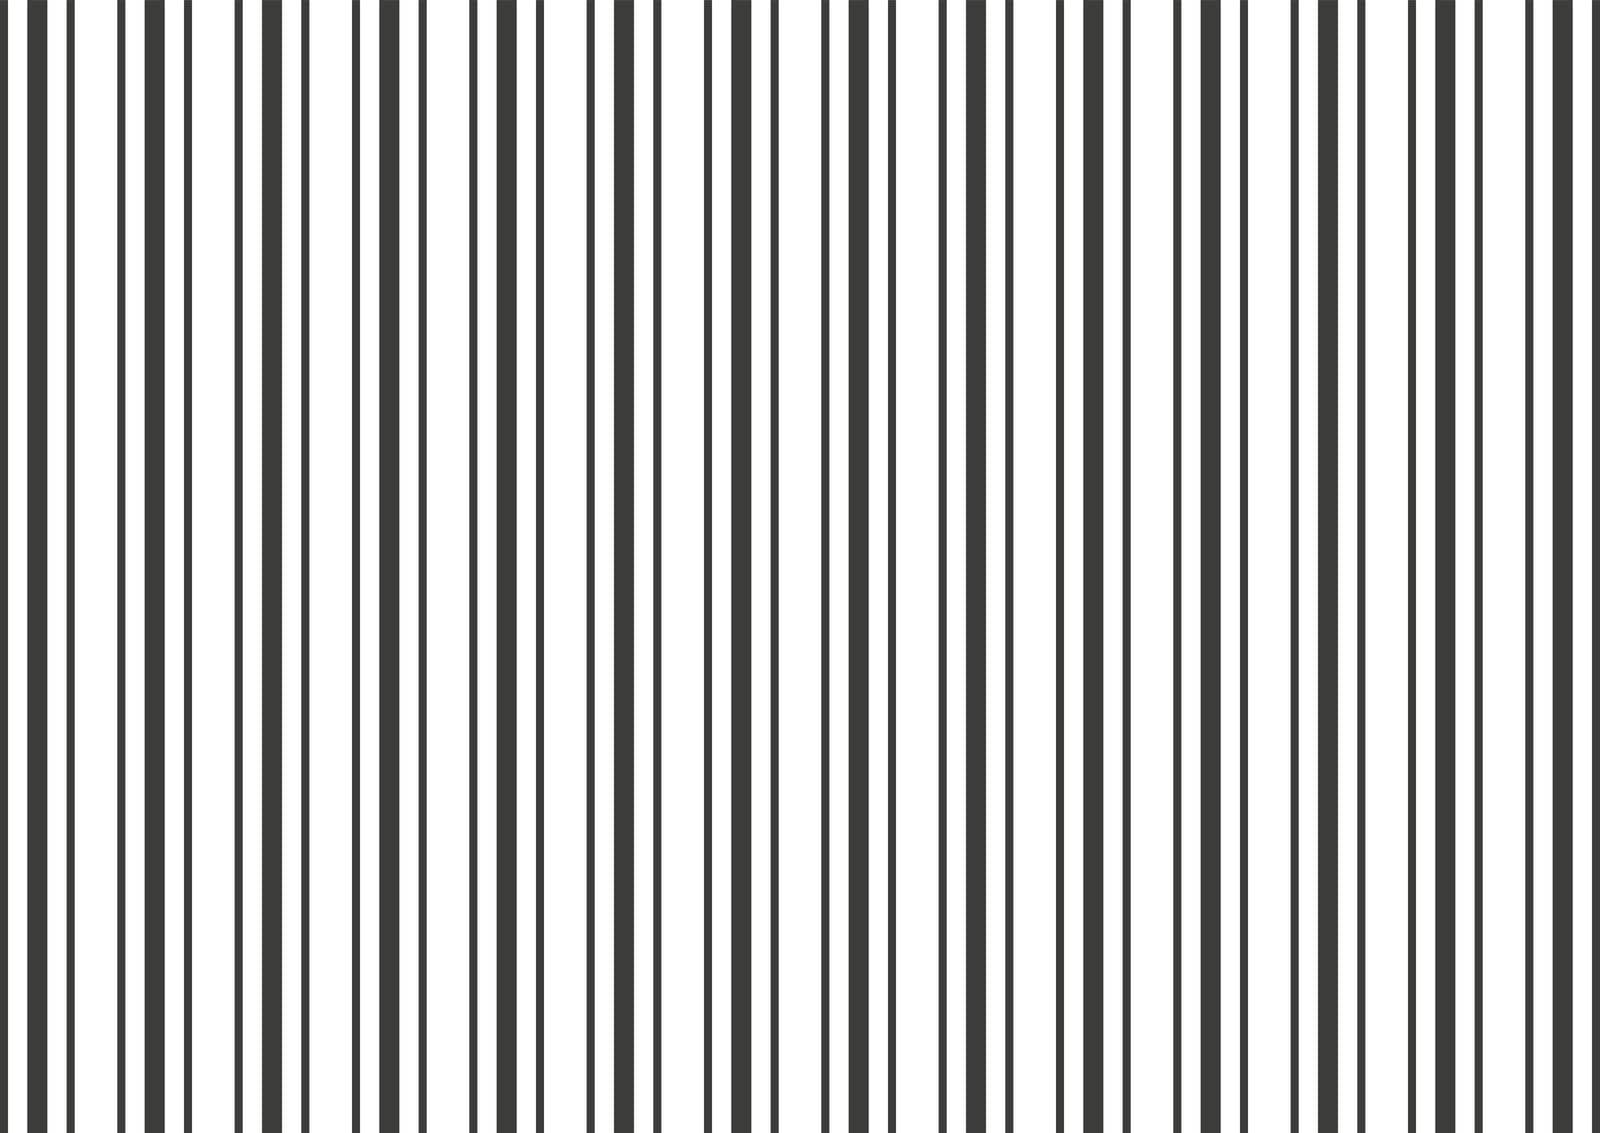 Vertical lines, linear halftone. Pattern with vertical stripes. Vector